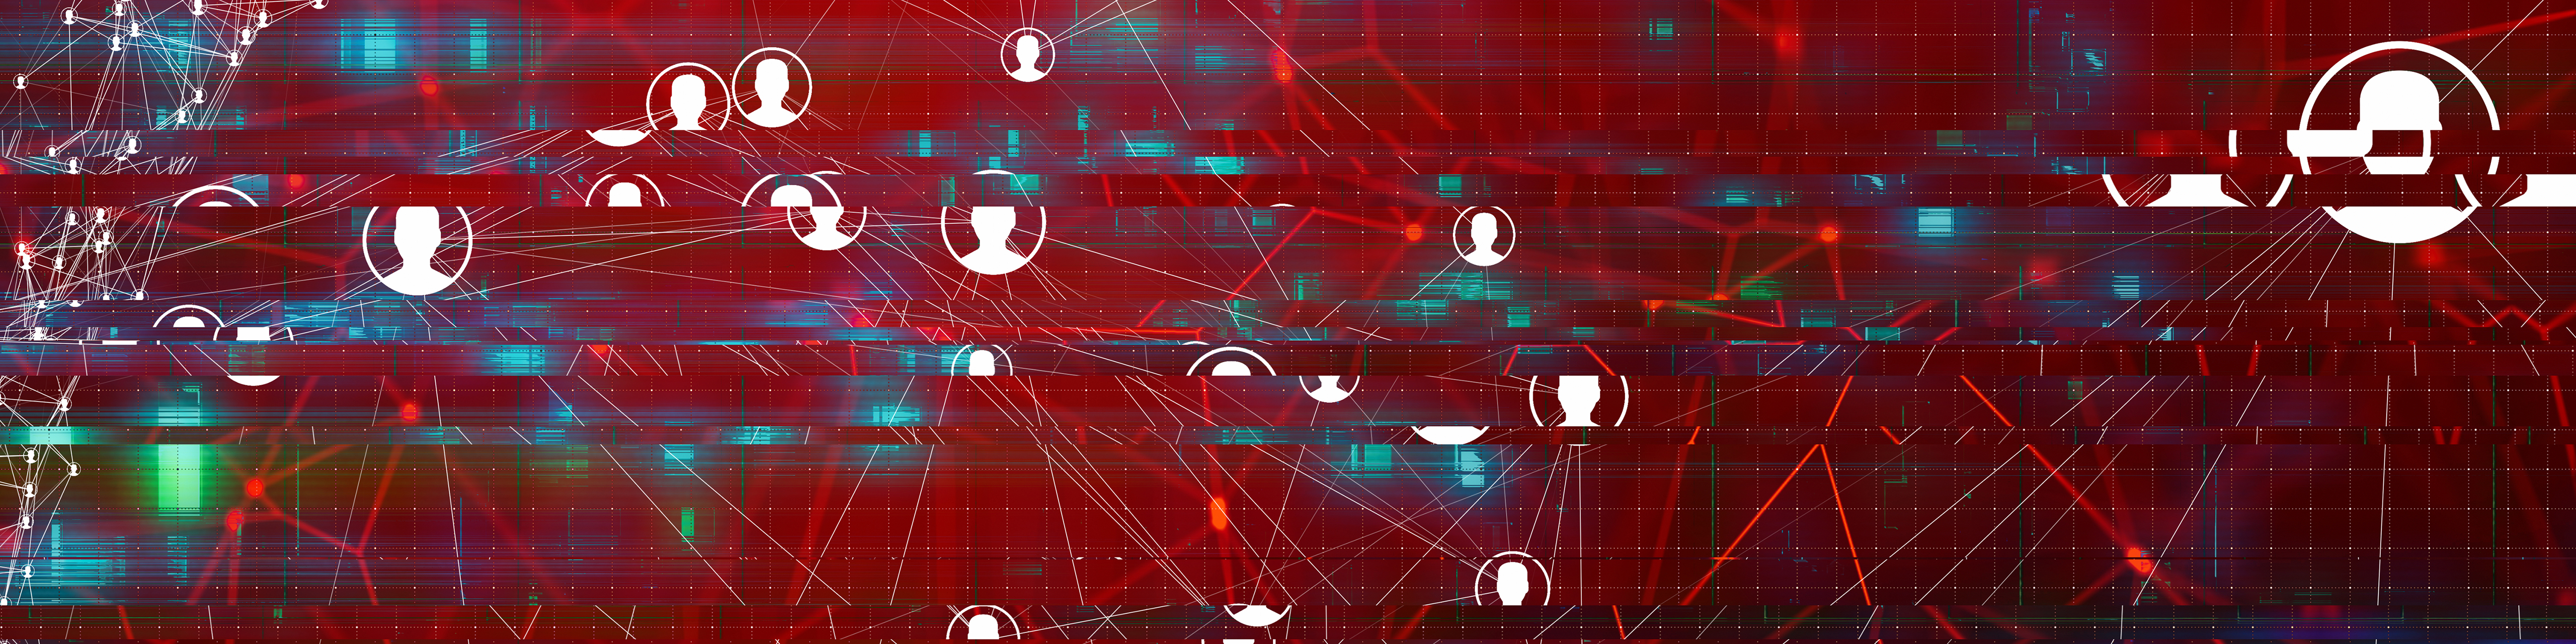 Graphic illustration of social media icons connected matrix-like against a red background